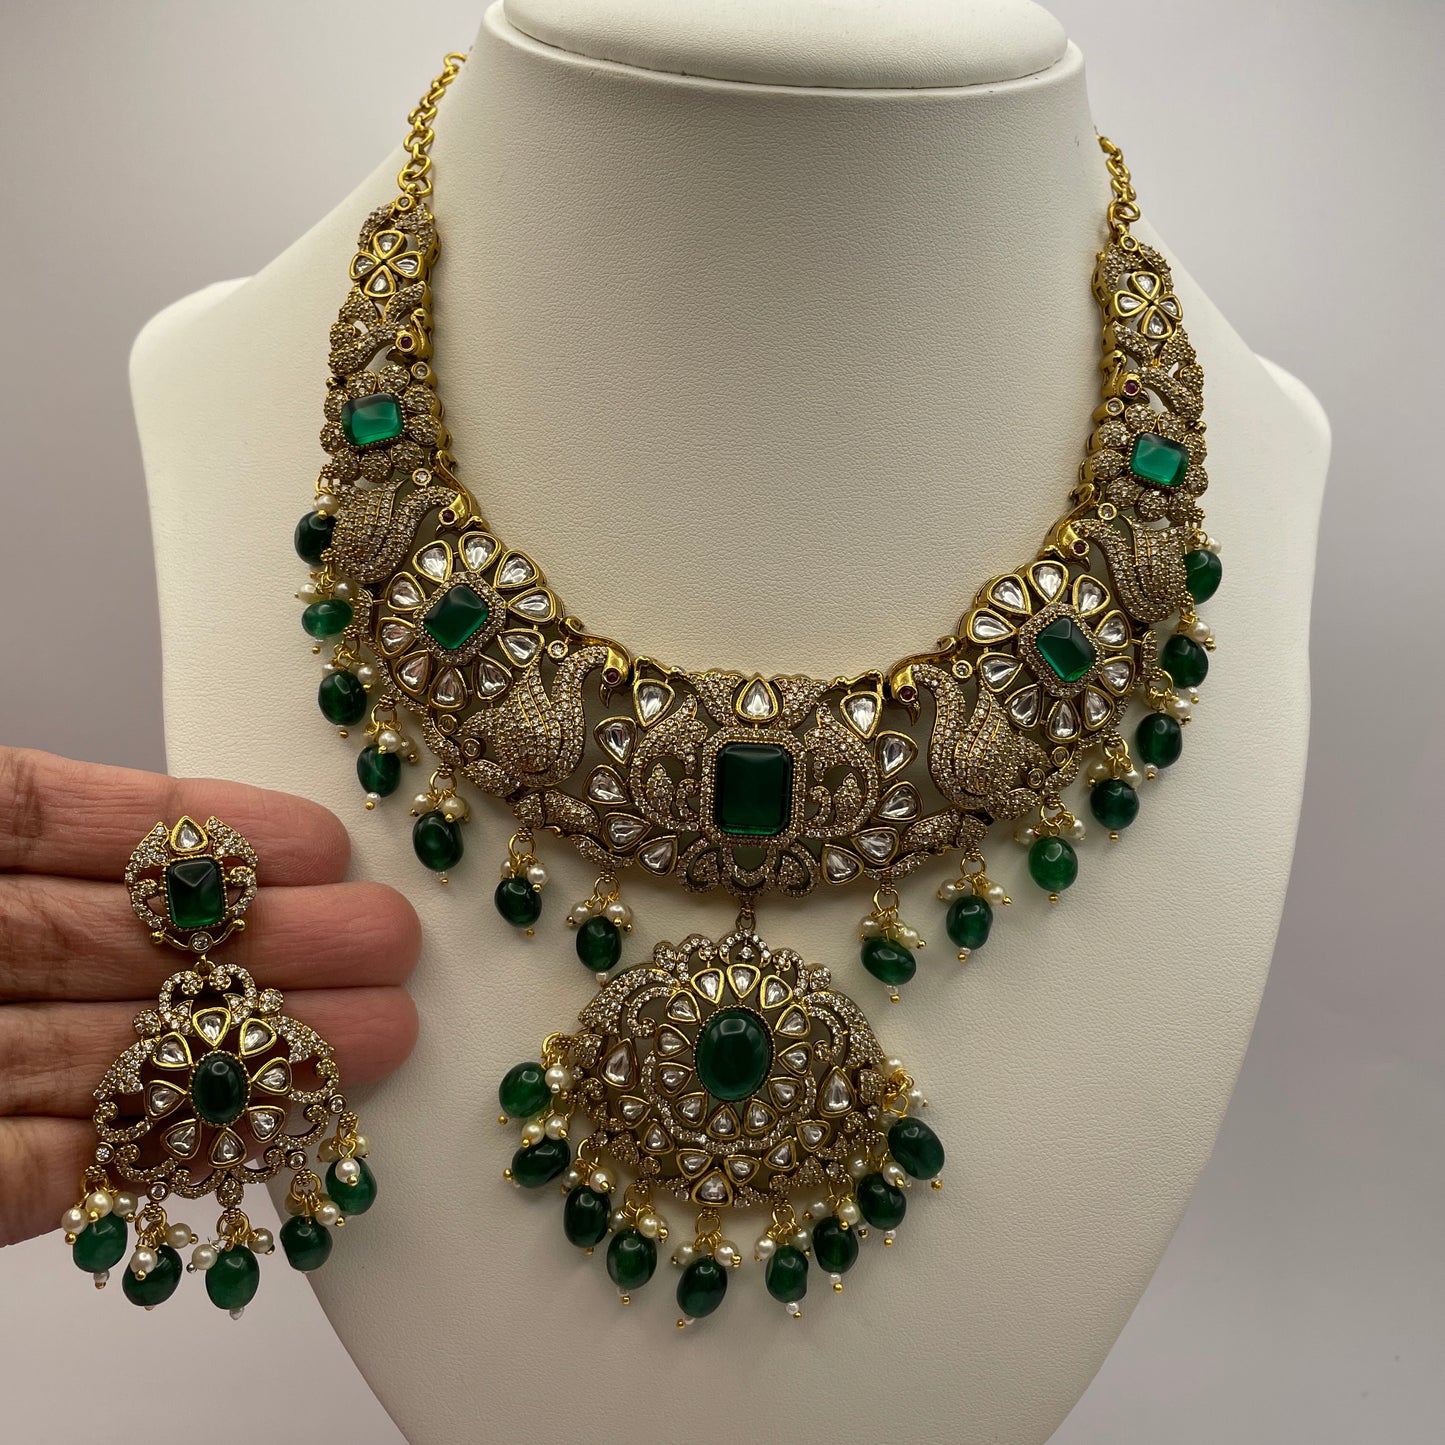 Enchanting Emerald Victorian: The Bottle Green Stones Necklace